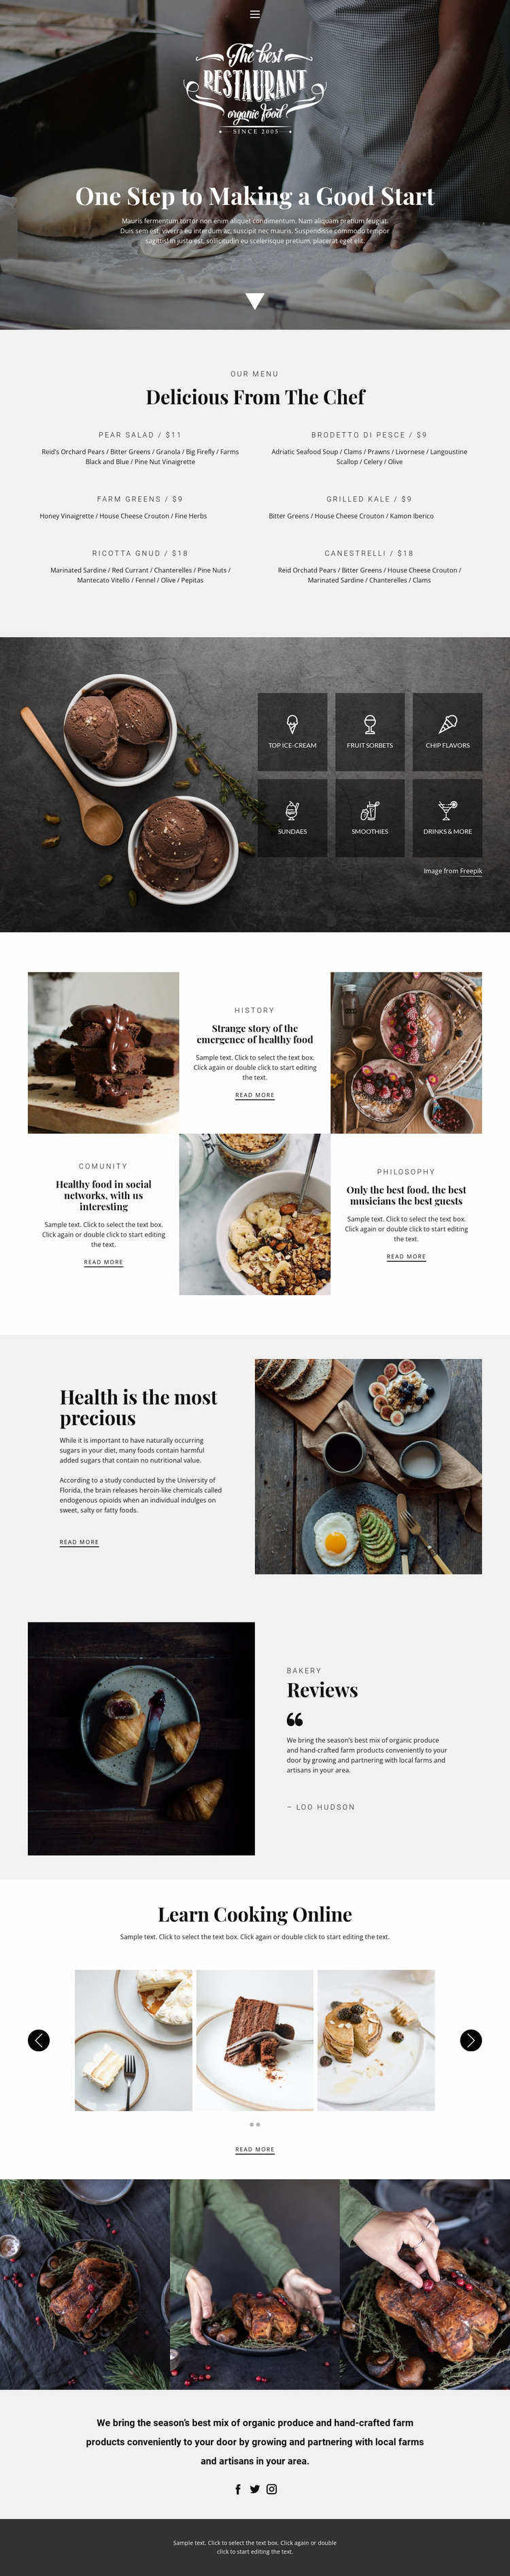 Recipes and cook lessons Website Design